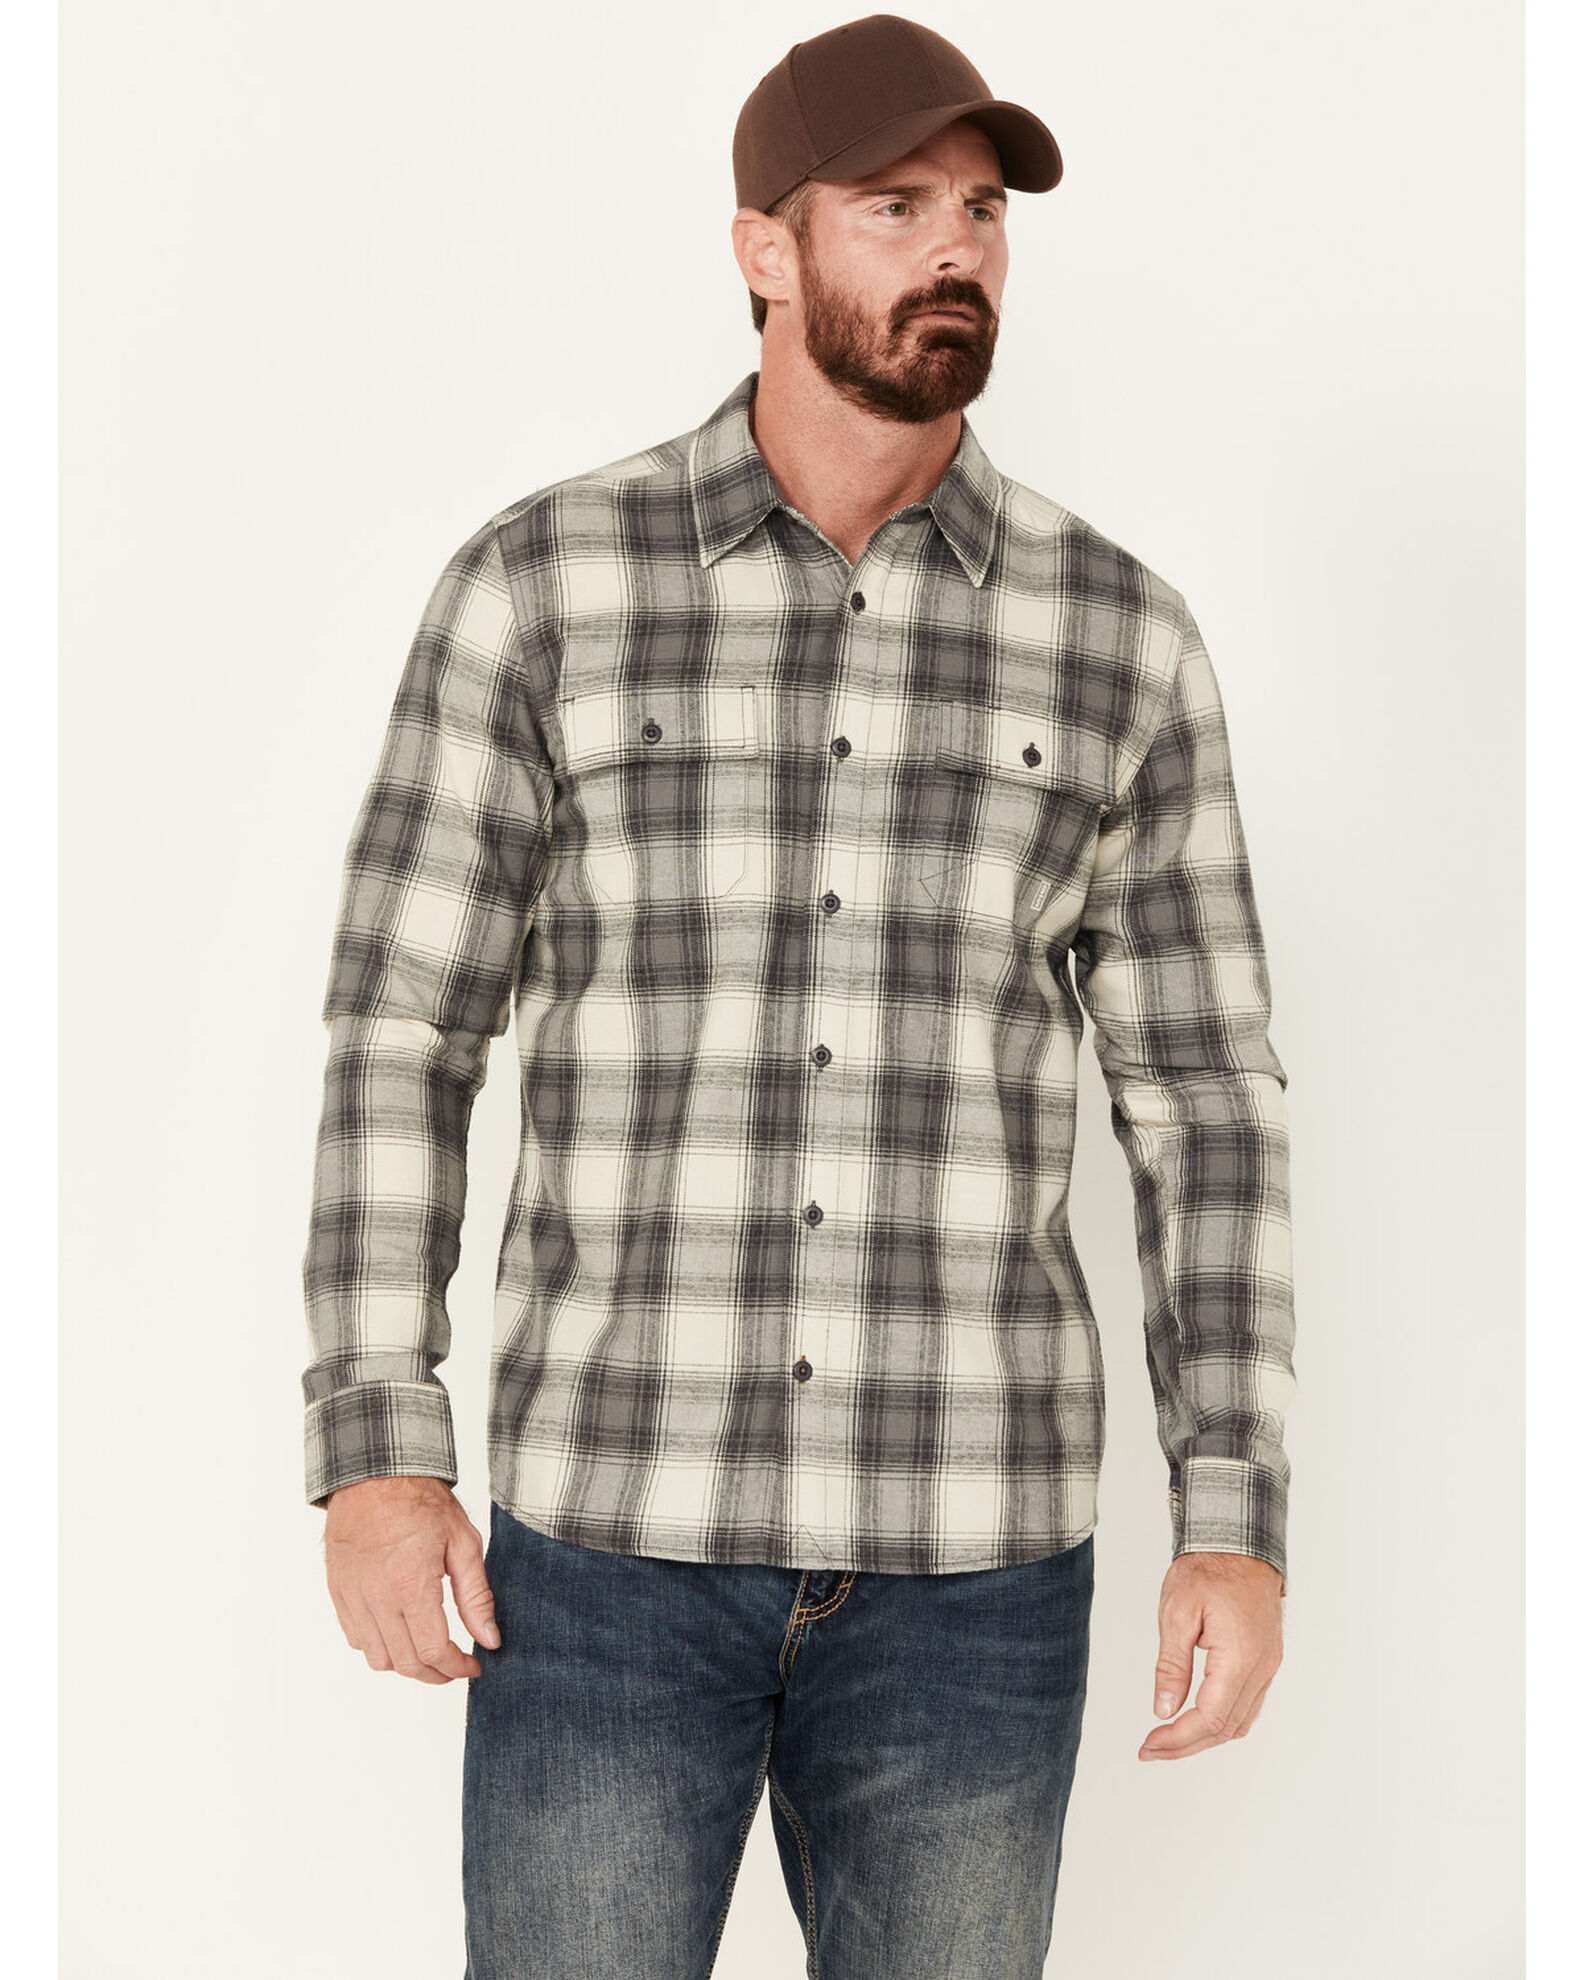 Brothers & Sons Men's Stewart Everyday Plaid Print Long Sleeve Button-Down Flannel Shirt